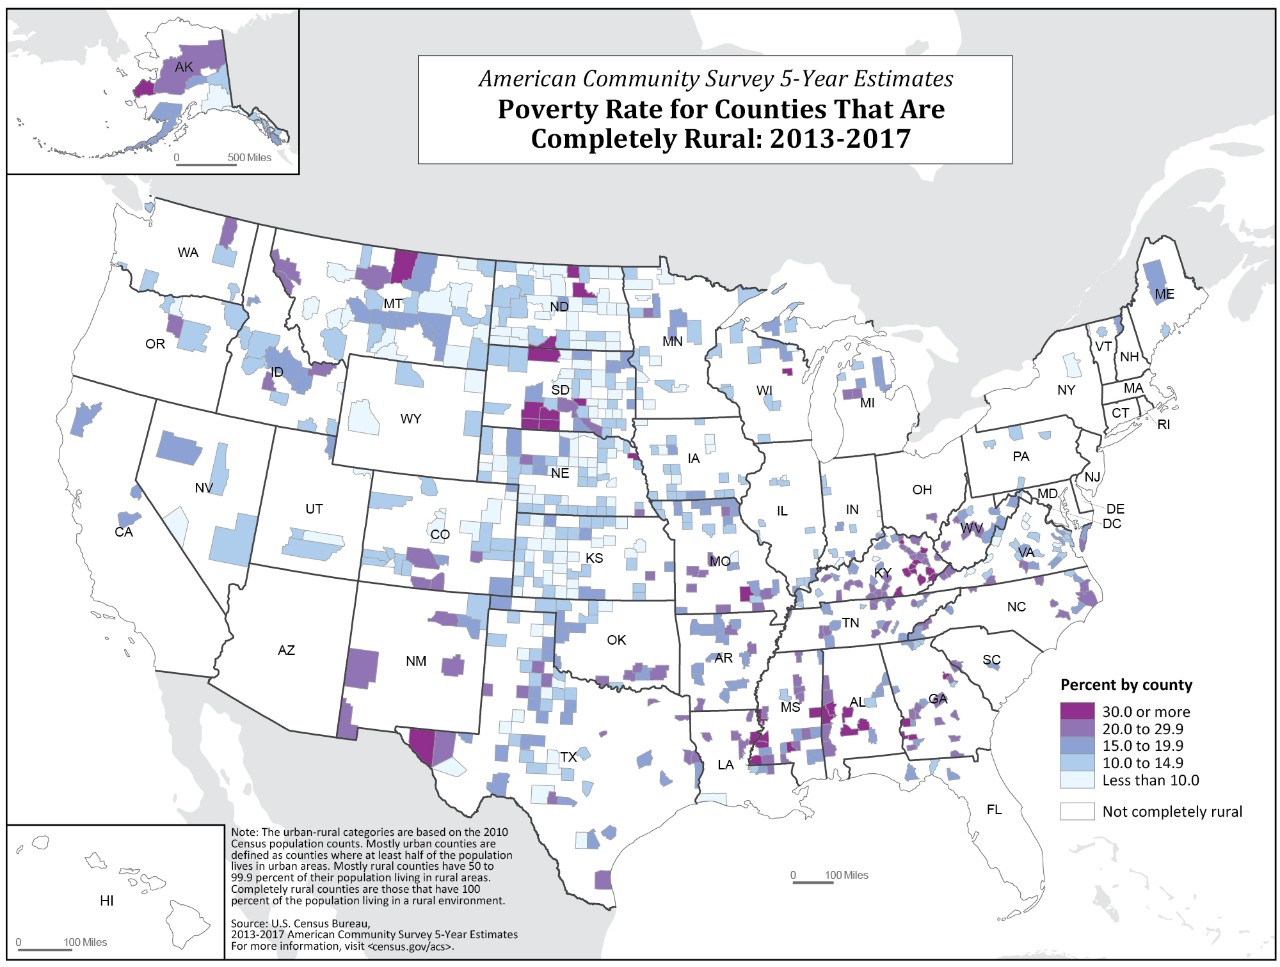 Poverty Rate for Counties That Are Completely Rural: 2013-2017